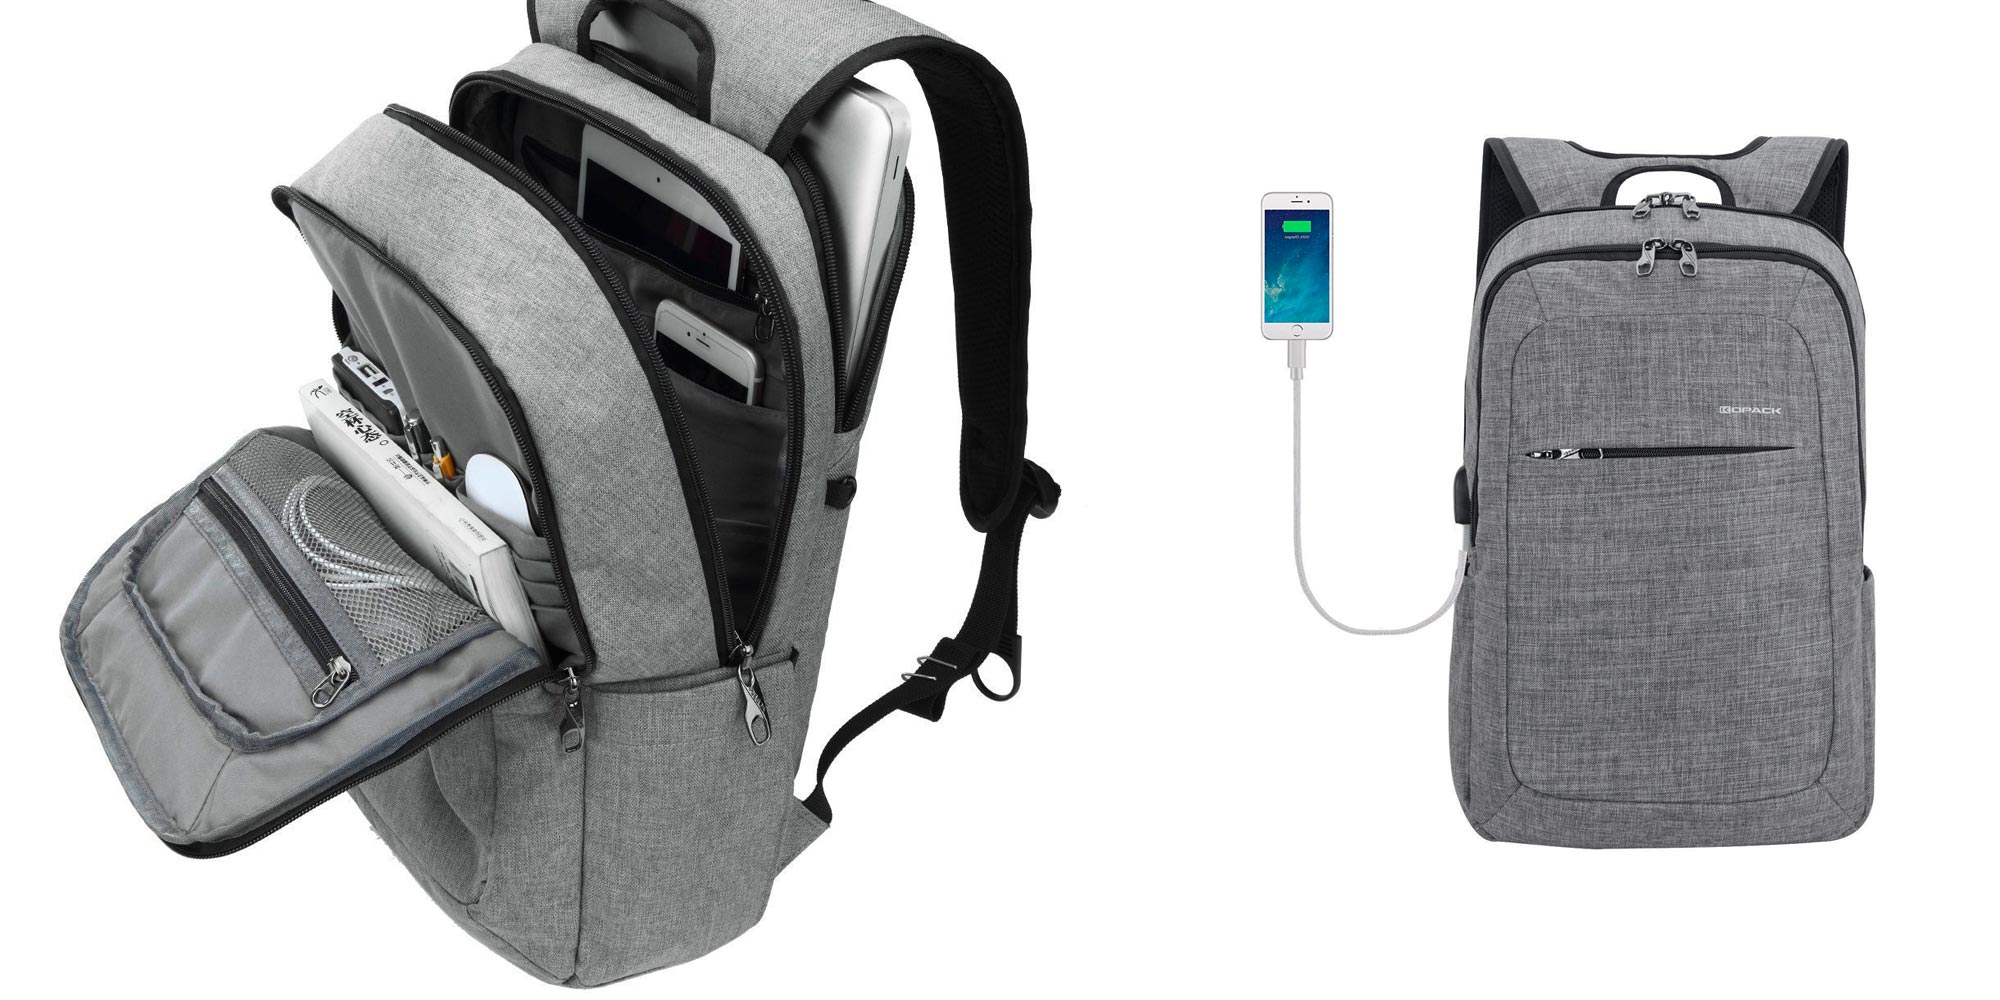 Keep your MacBook safe + iPhone charged in a backpack w/ external USB ports: $18.50 - 9to5Toys